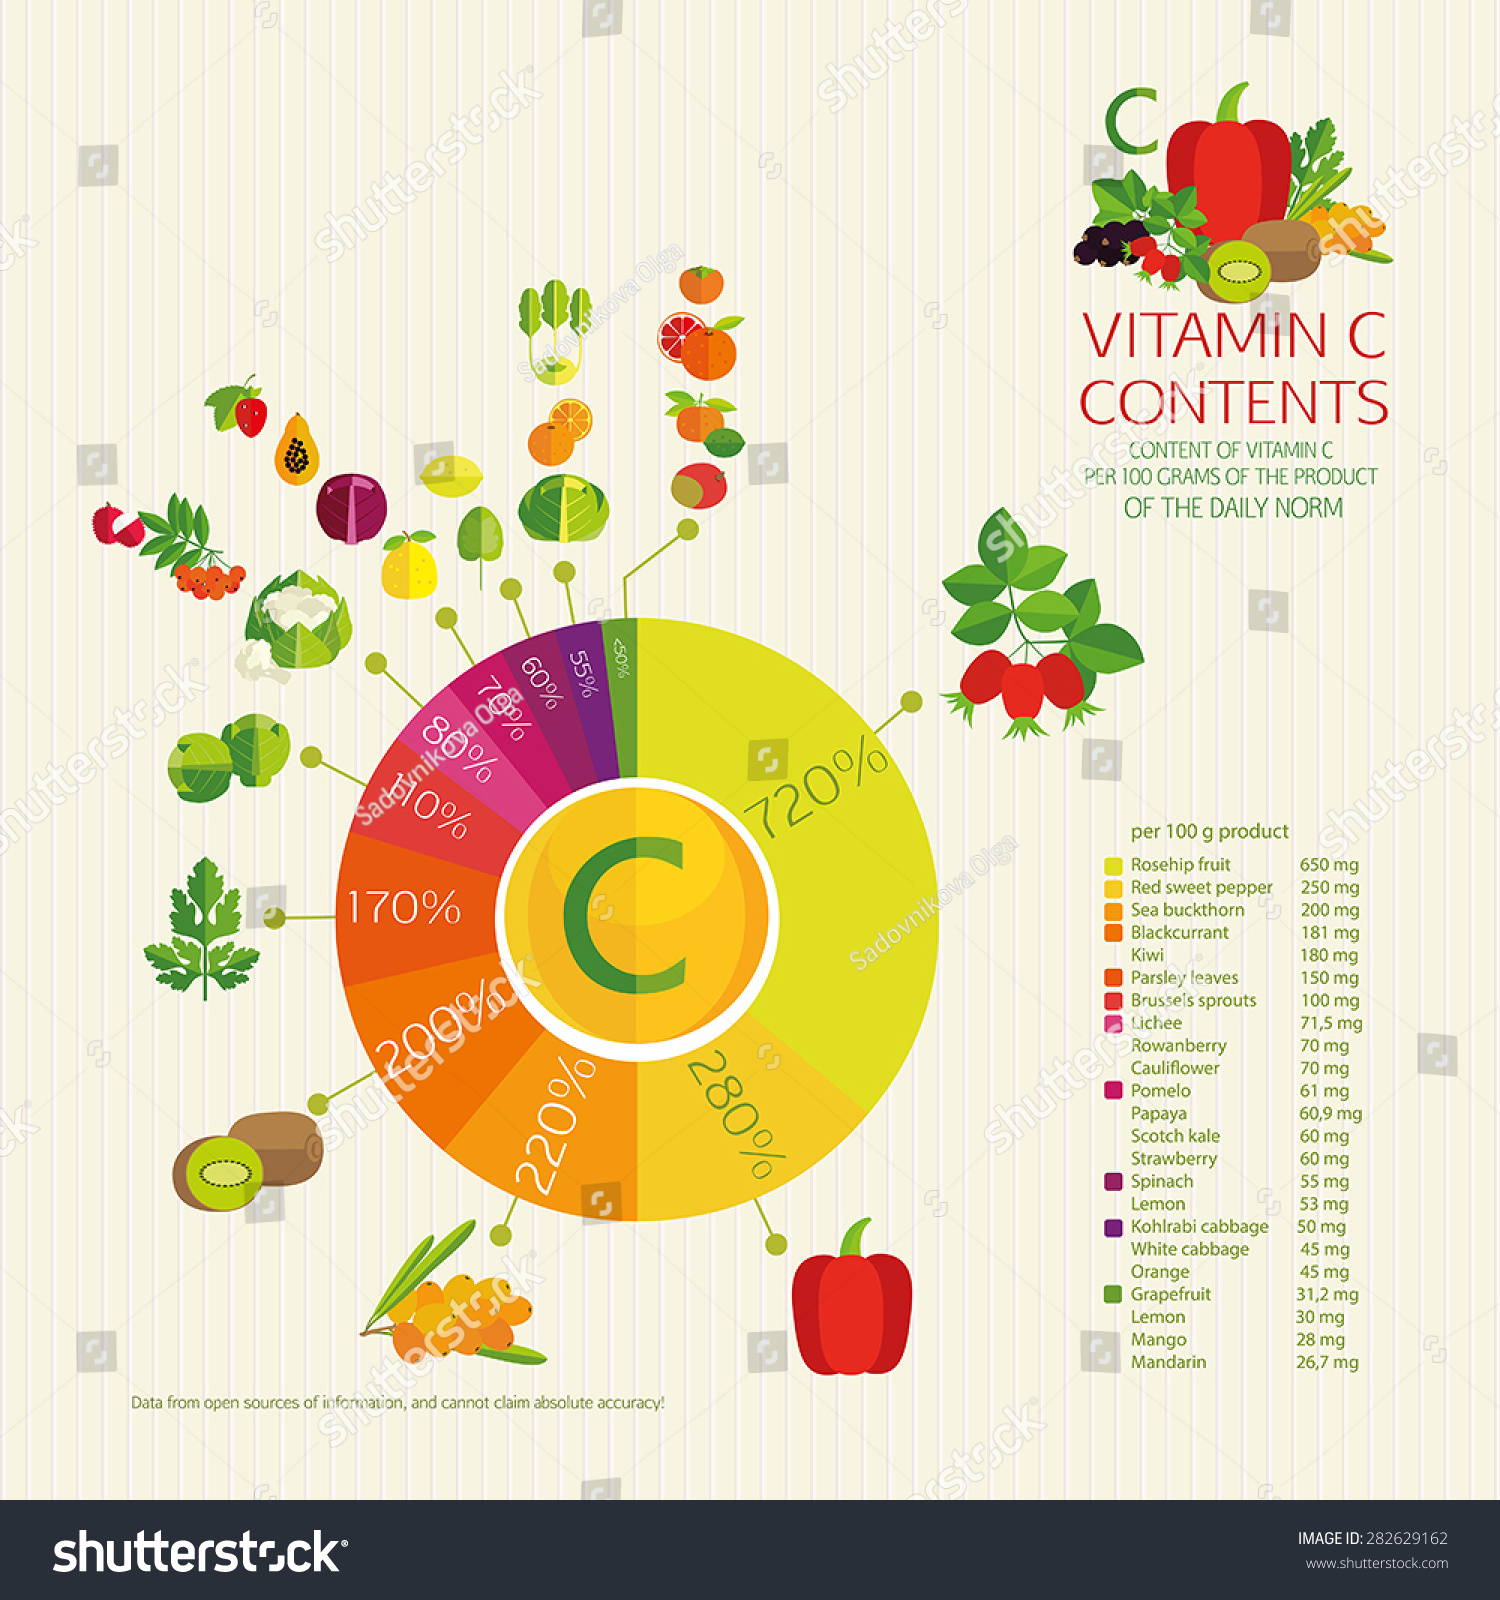 Diagram Vitamin C Content. Vegetables, Fruits And Berries With A ...